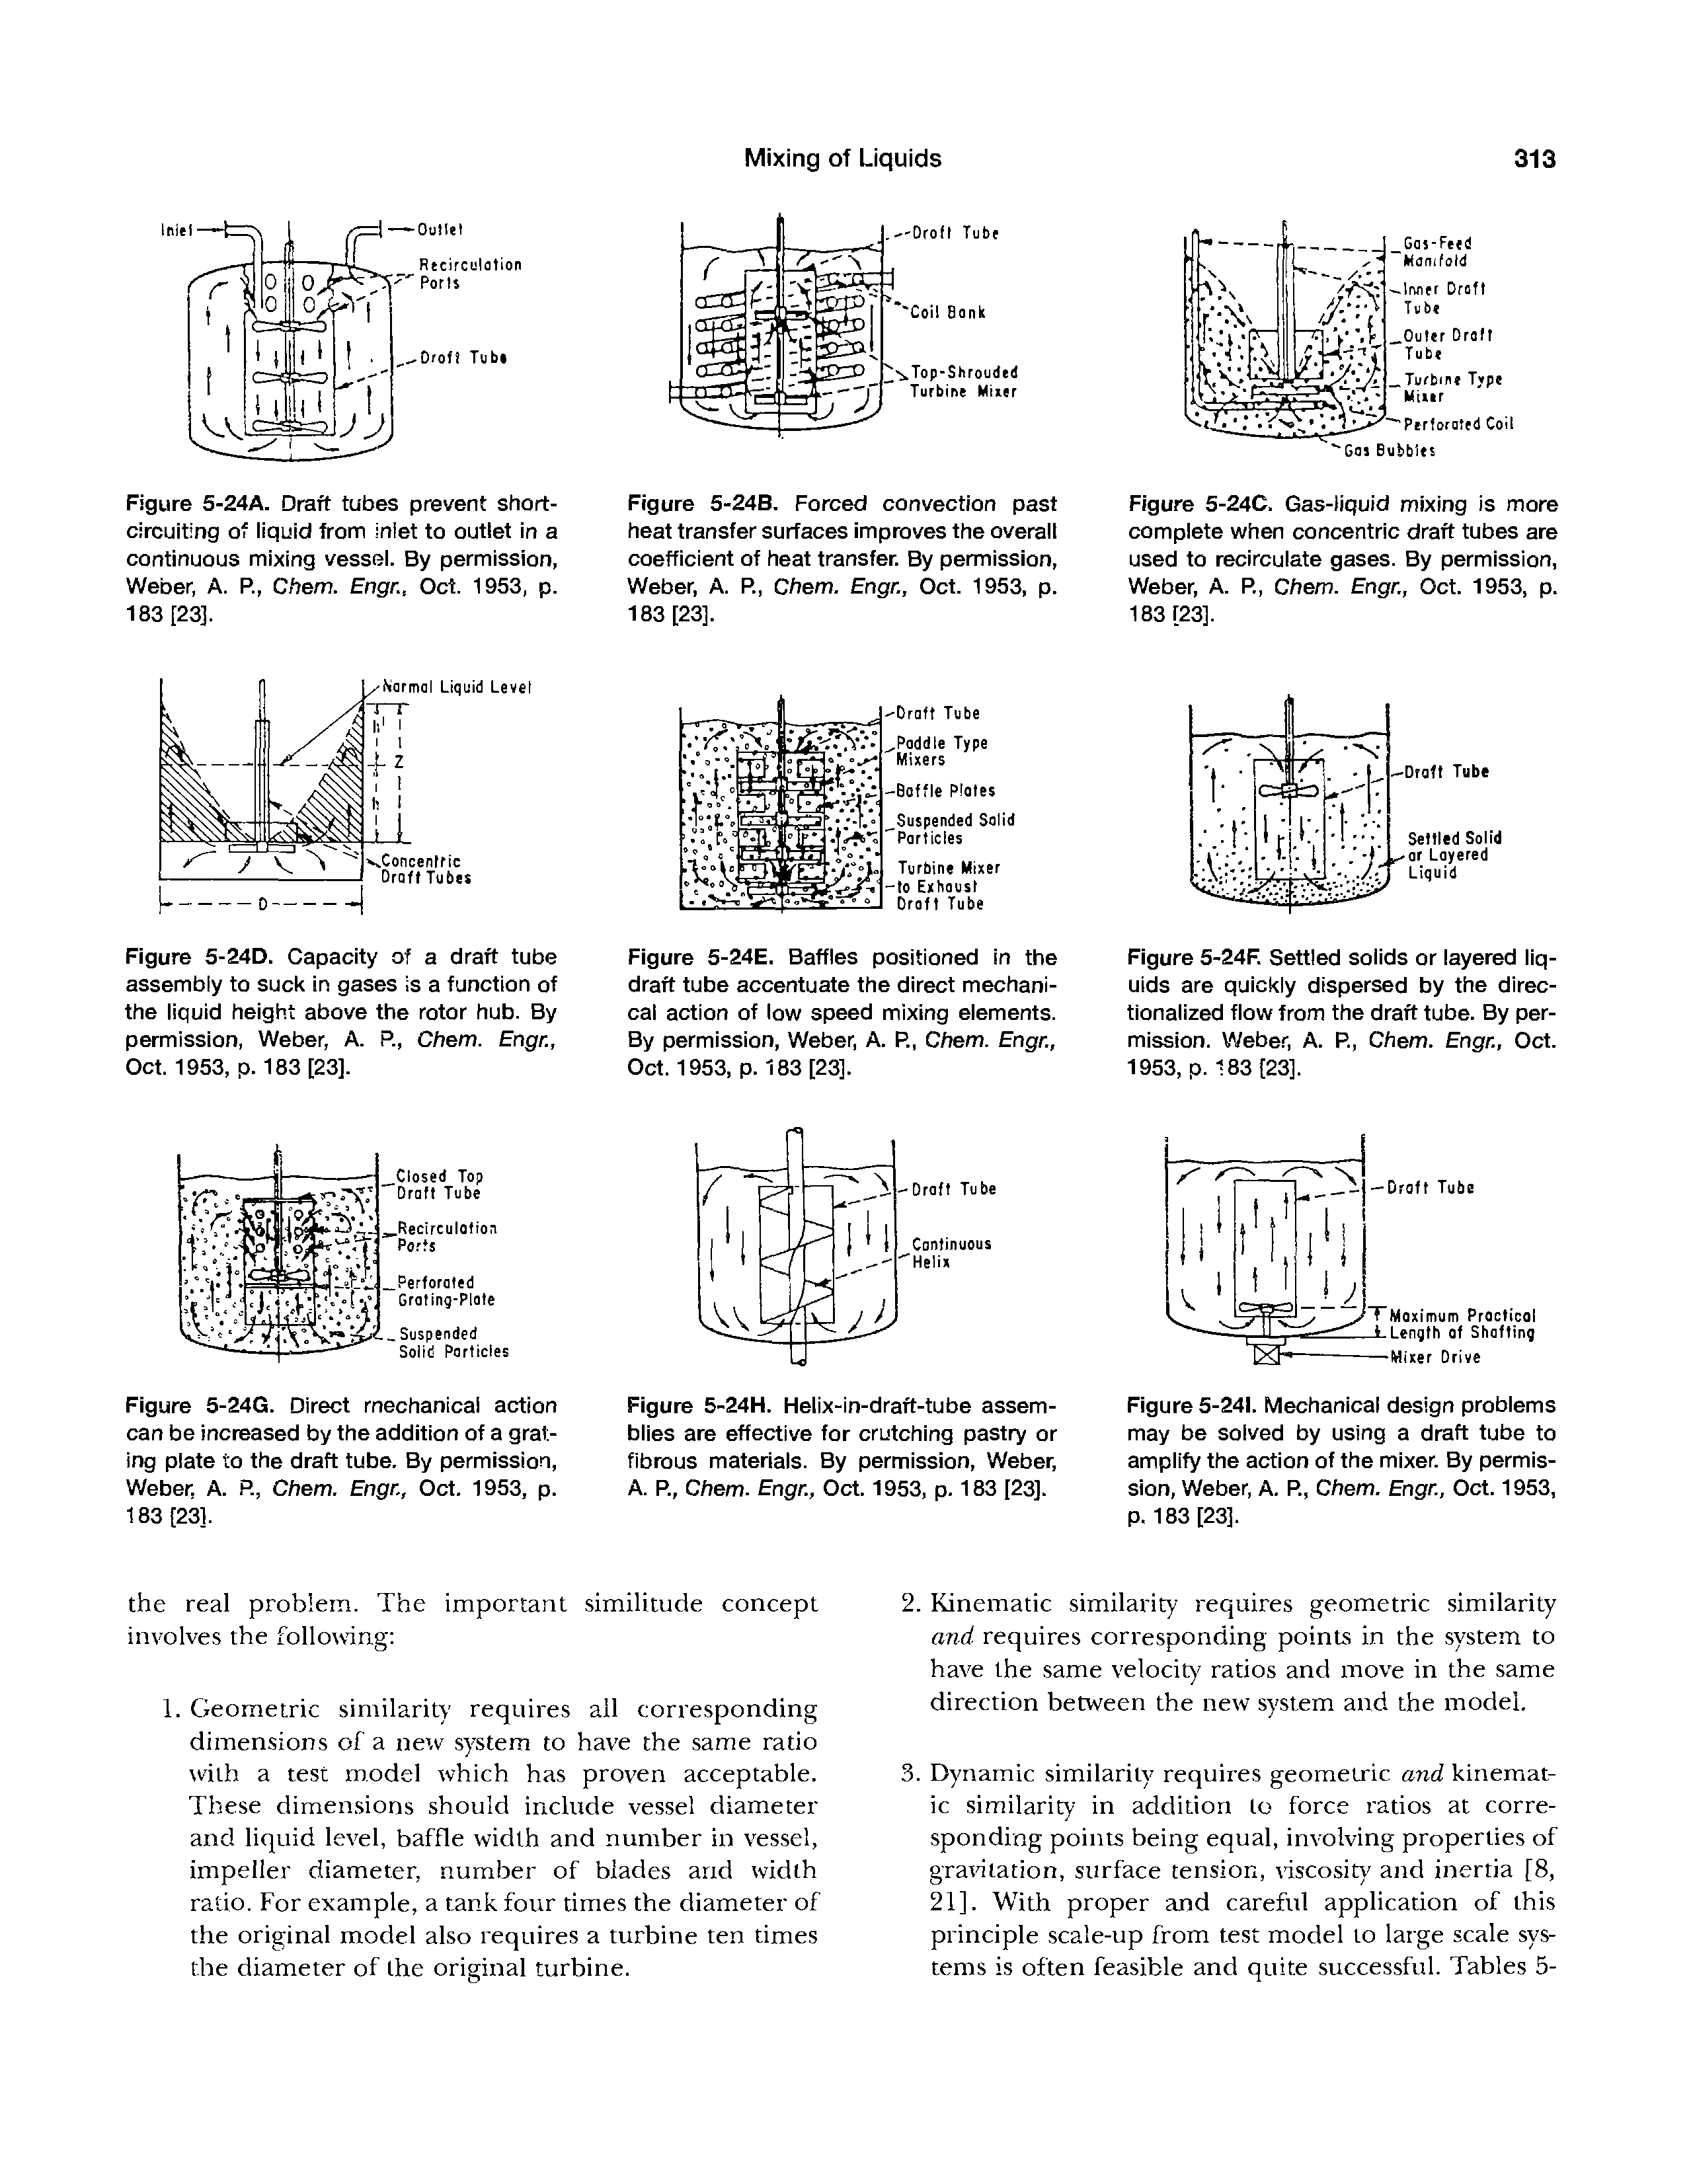 Figure 5-24C. Gas-liquid mixing is more complete when concentric draft tubes are used to recirculate gases. By permission, Weber, A. R, Chem. Engr., Oct. 1953, p. 183 [23].